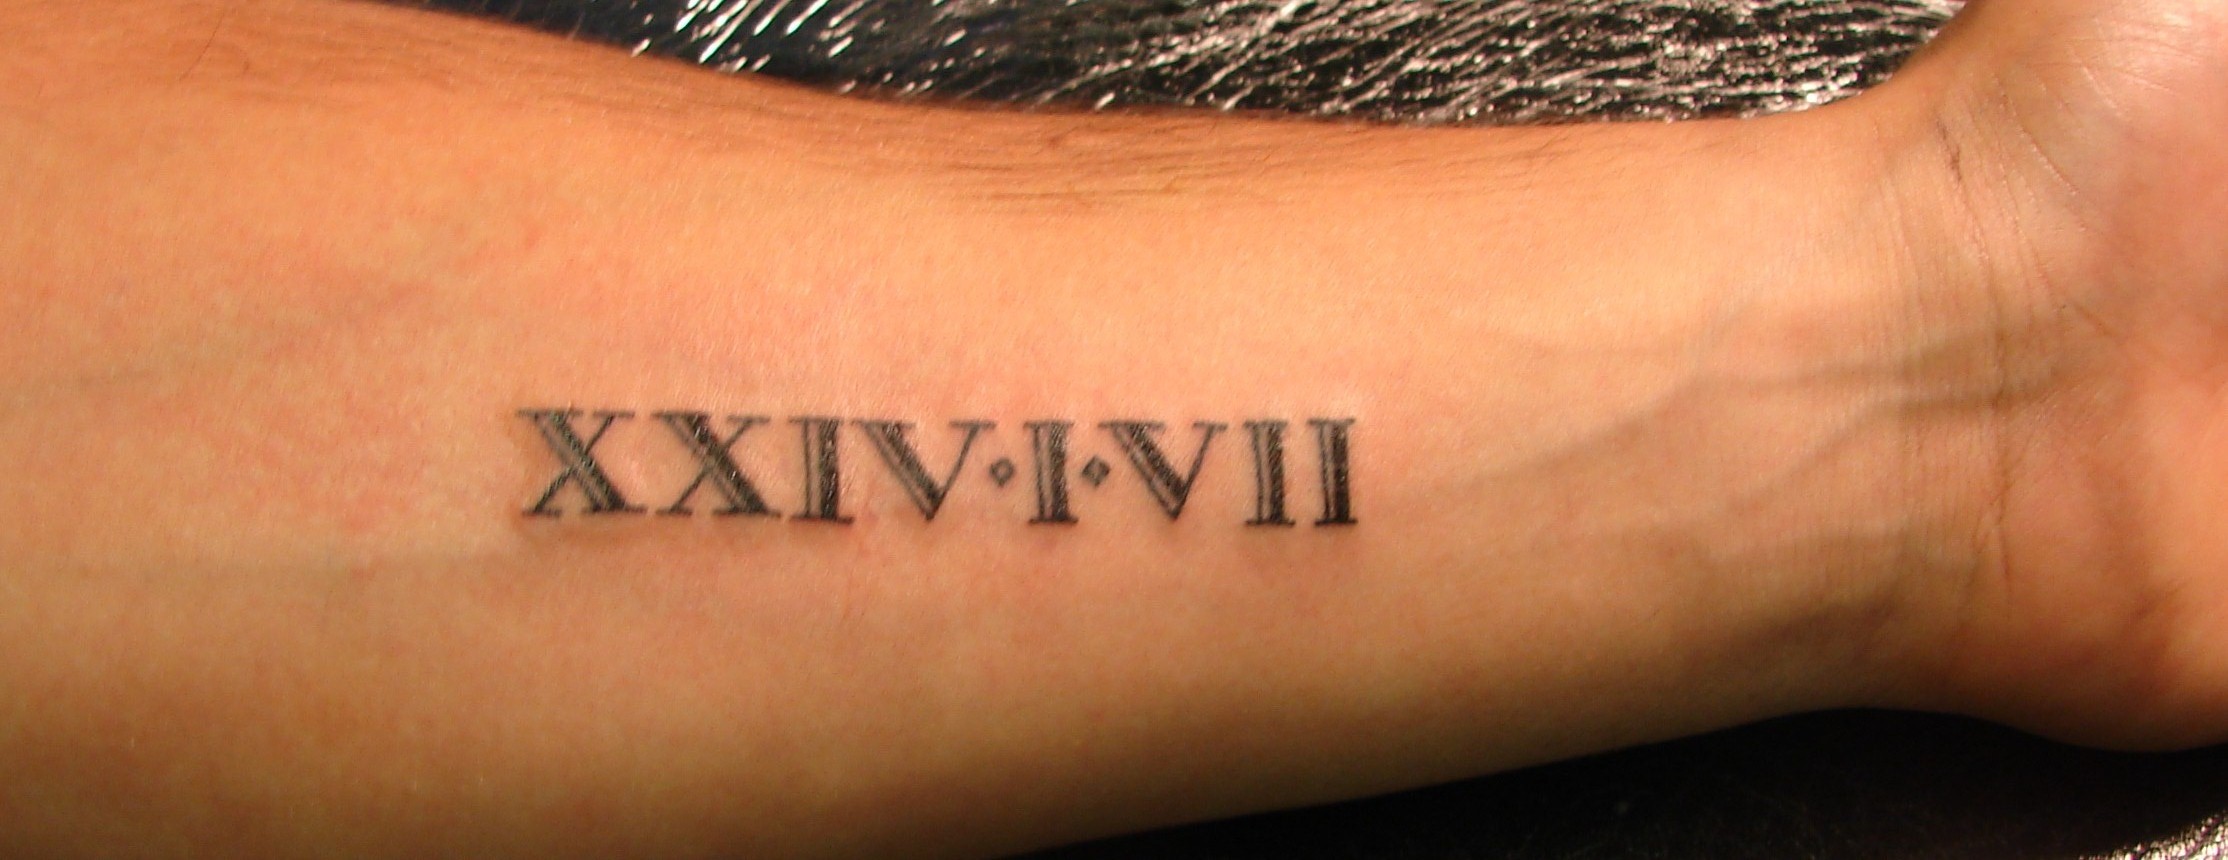 10 Small, Subtle Tattoo Ideas That May Interest You | Read ...